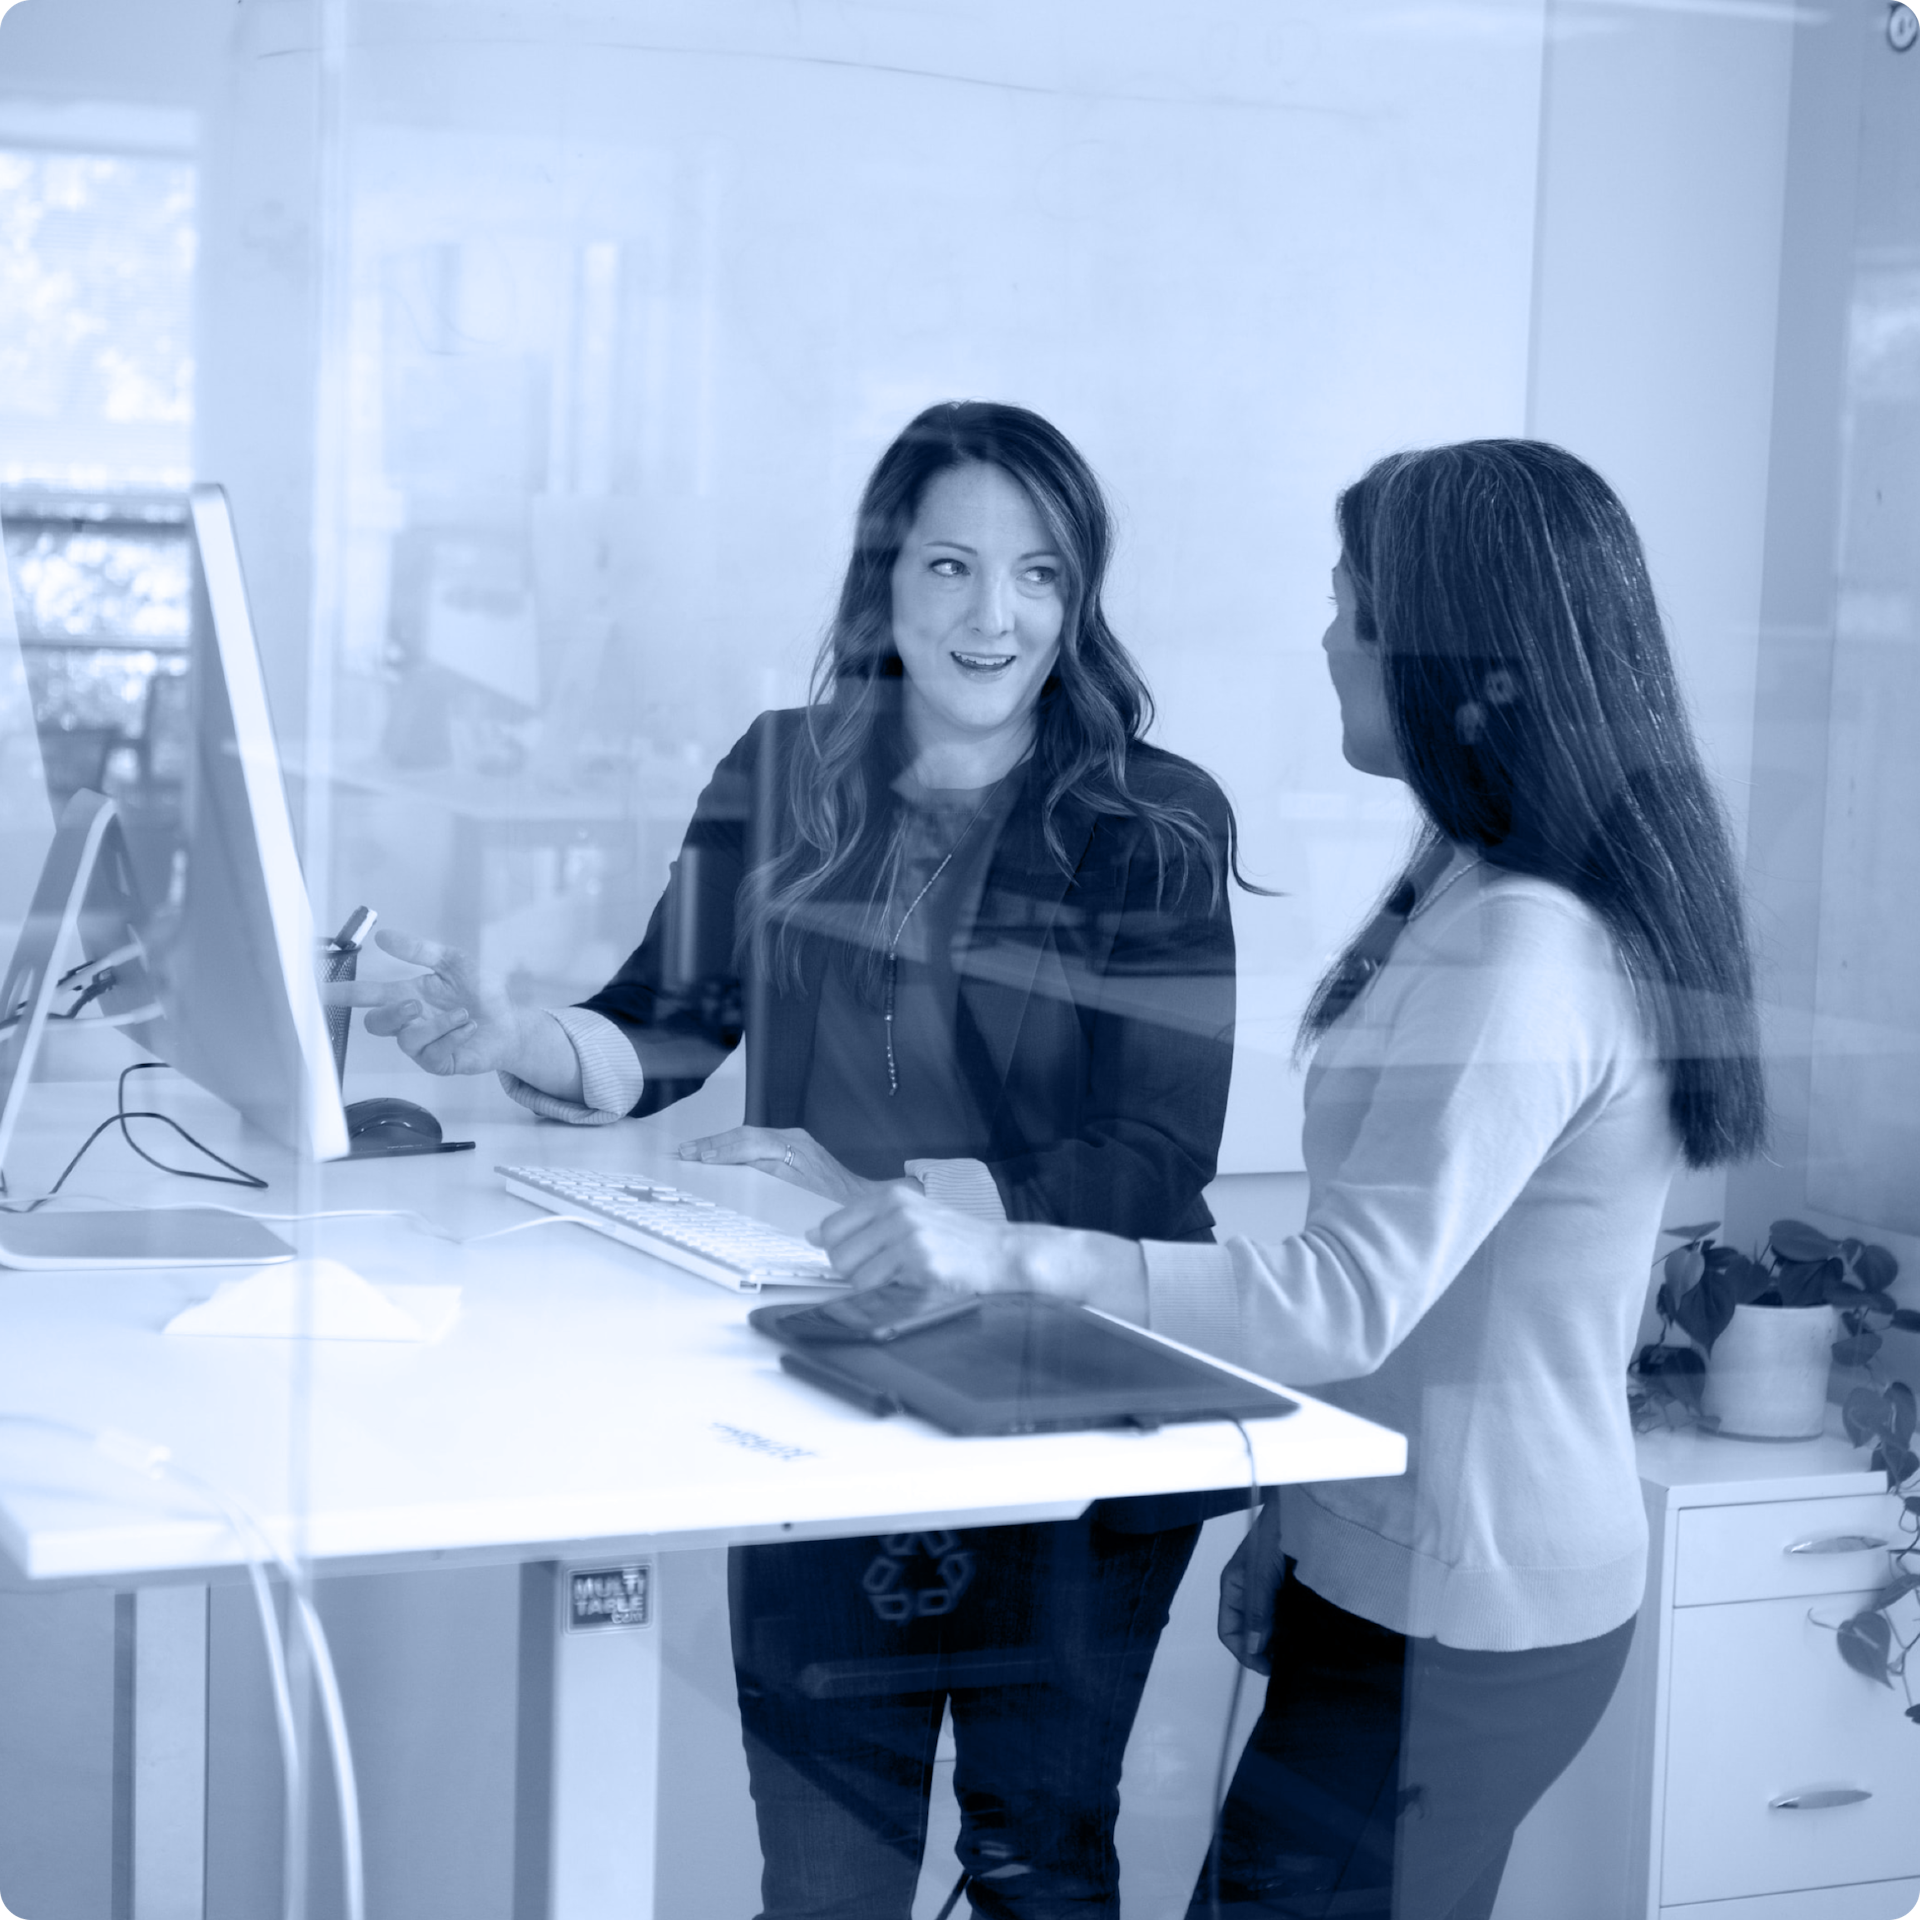 A photo of two people with long hair talking at a standing desk.